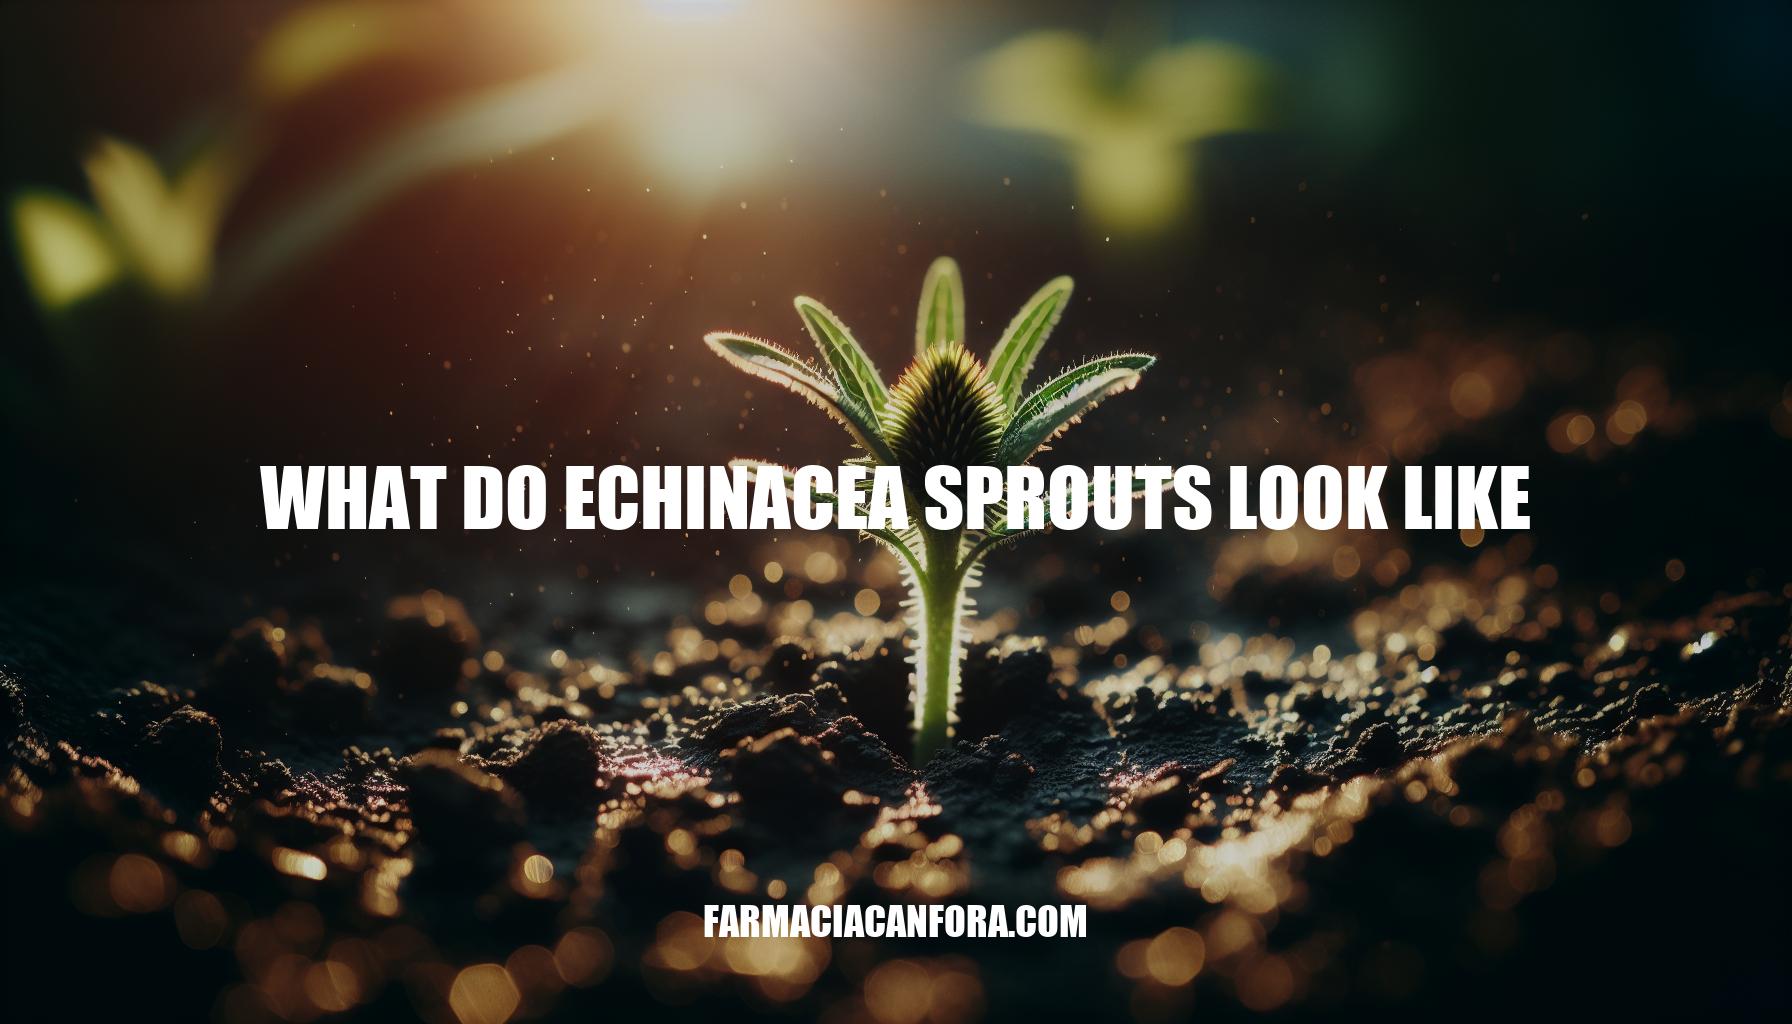 What Do Echinacea Sprouts Look Like